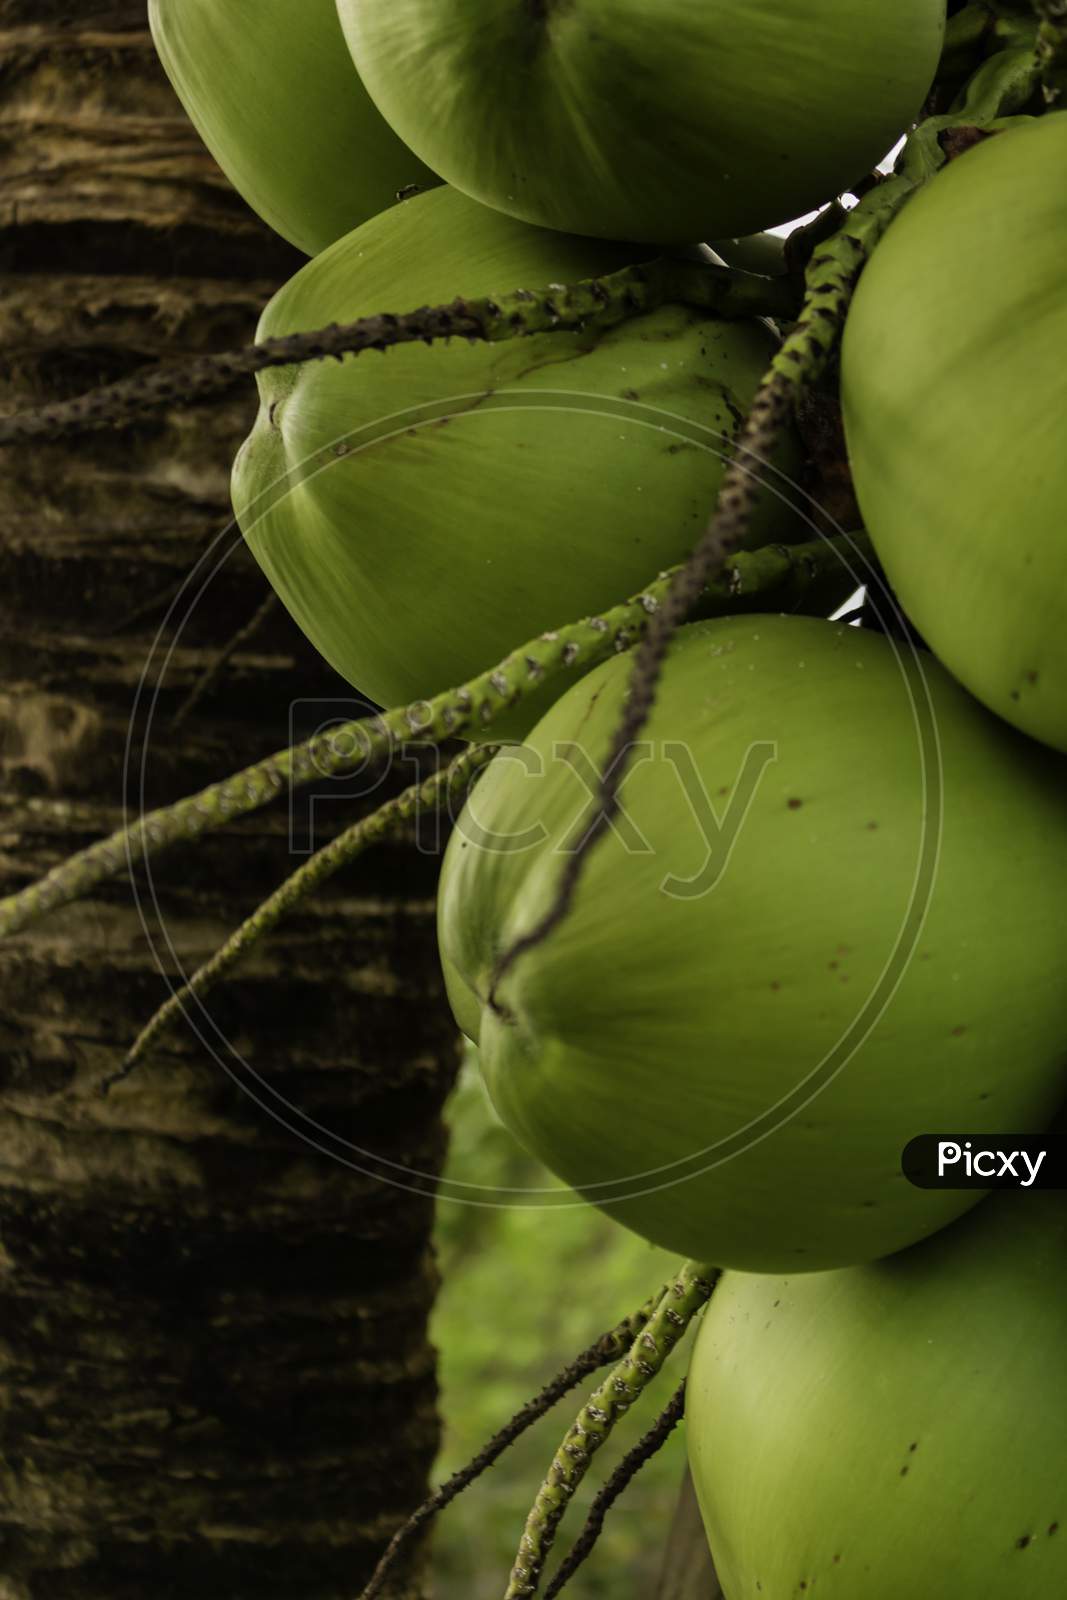 Posy Of Coconuts On A Palm Tree. Round Fruit Of Green Color With Water Inside. Nutritious Food Of Vegetable Origin. Plants For The Production Of Coconut Oil.